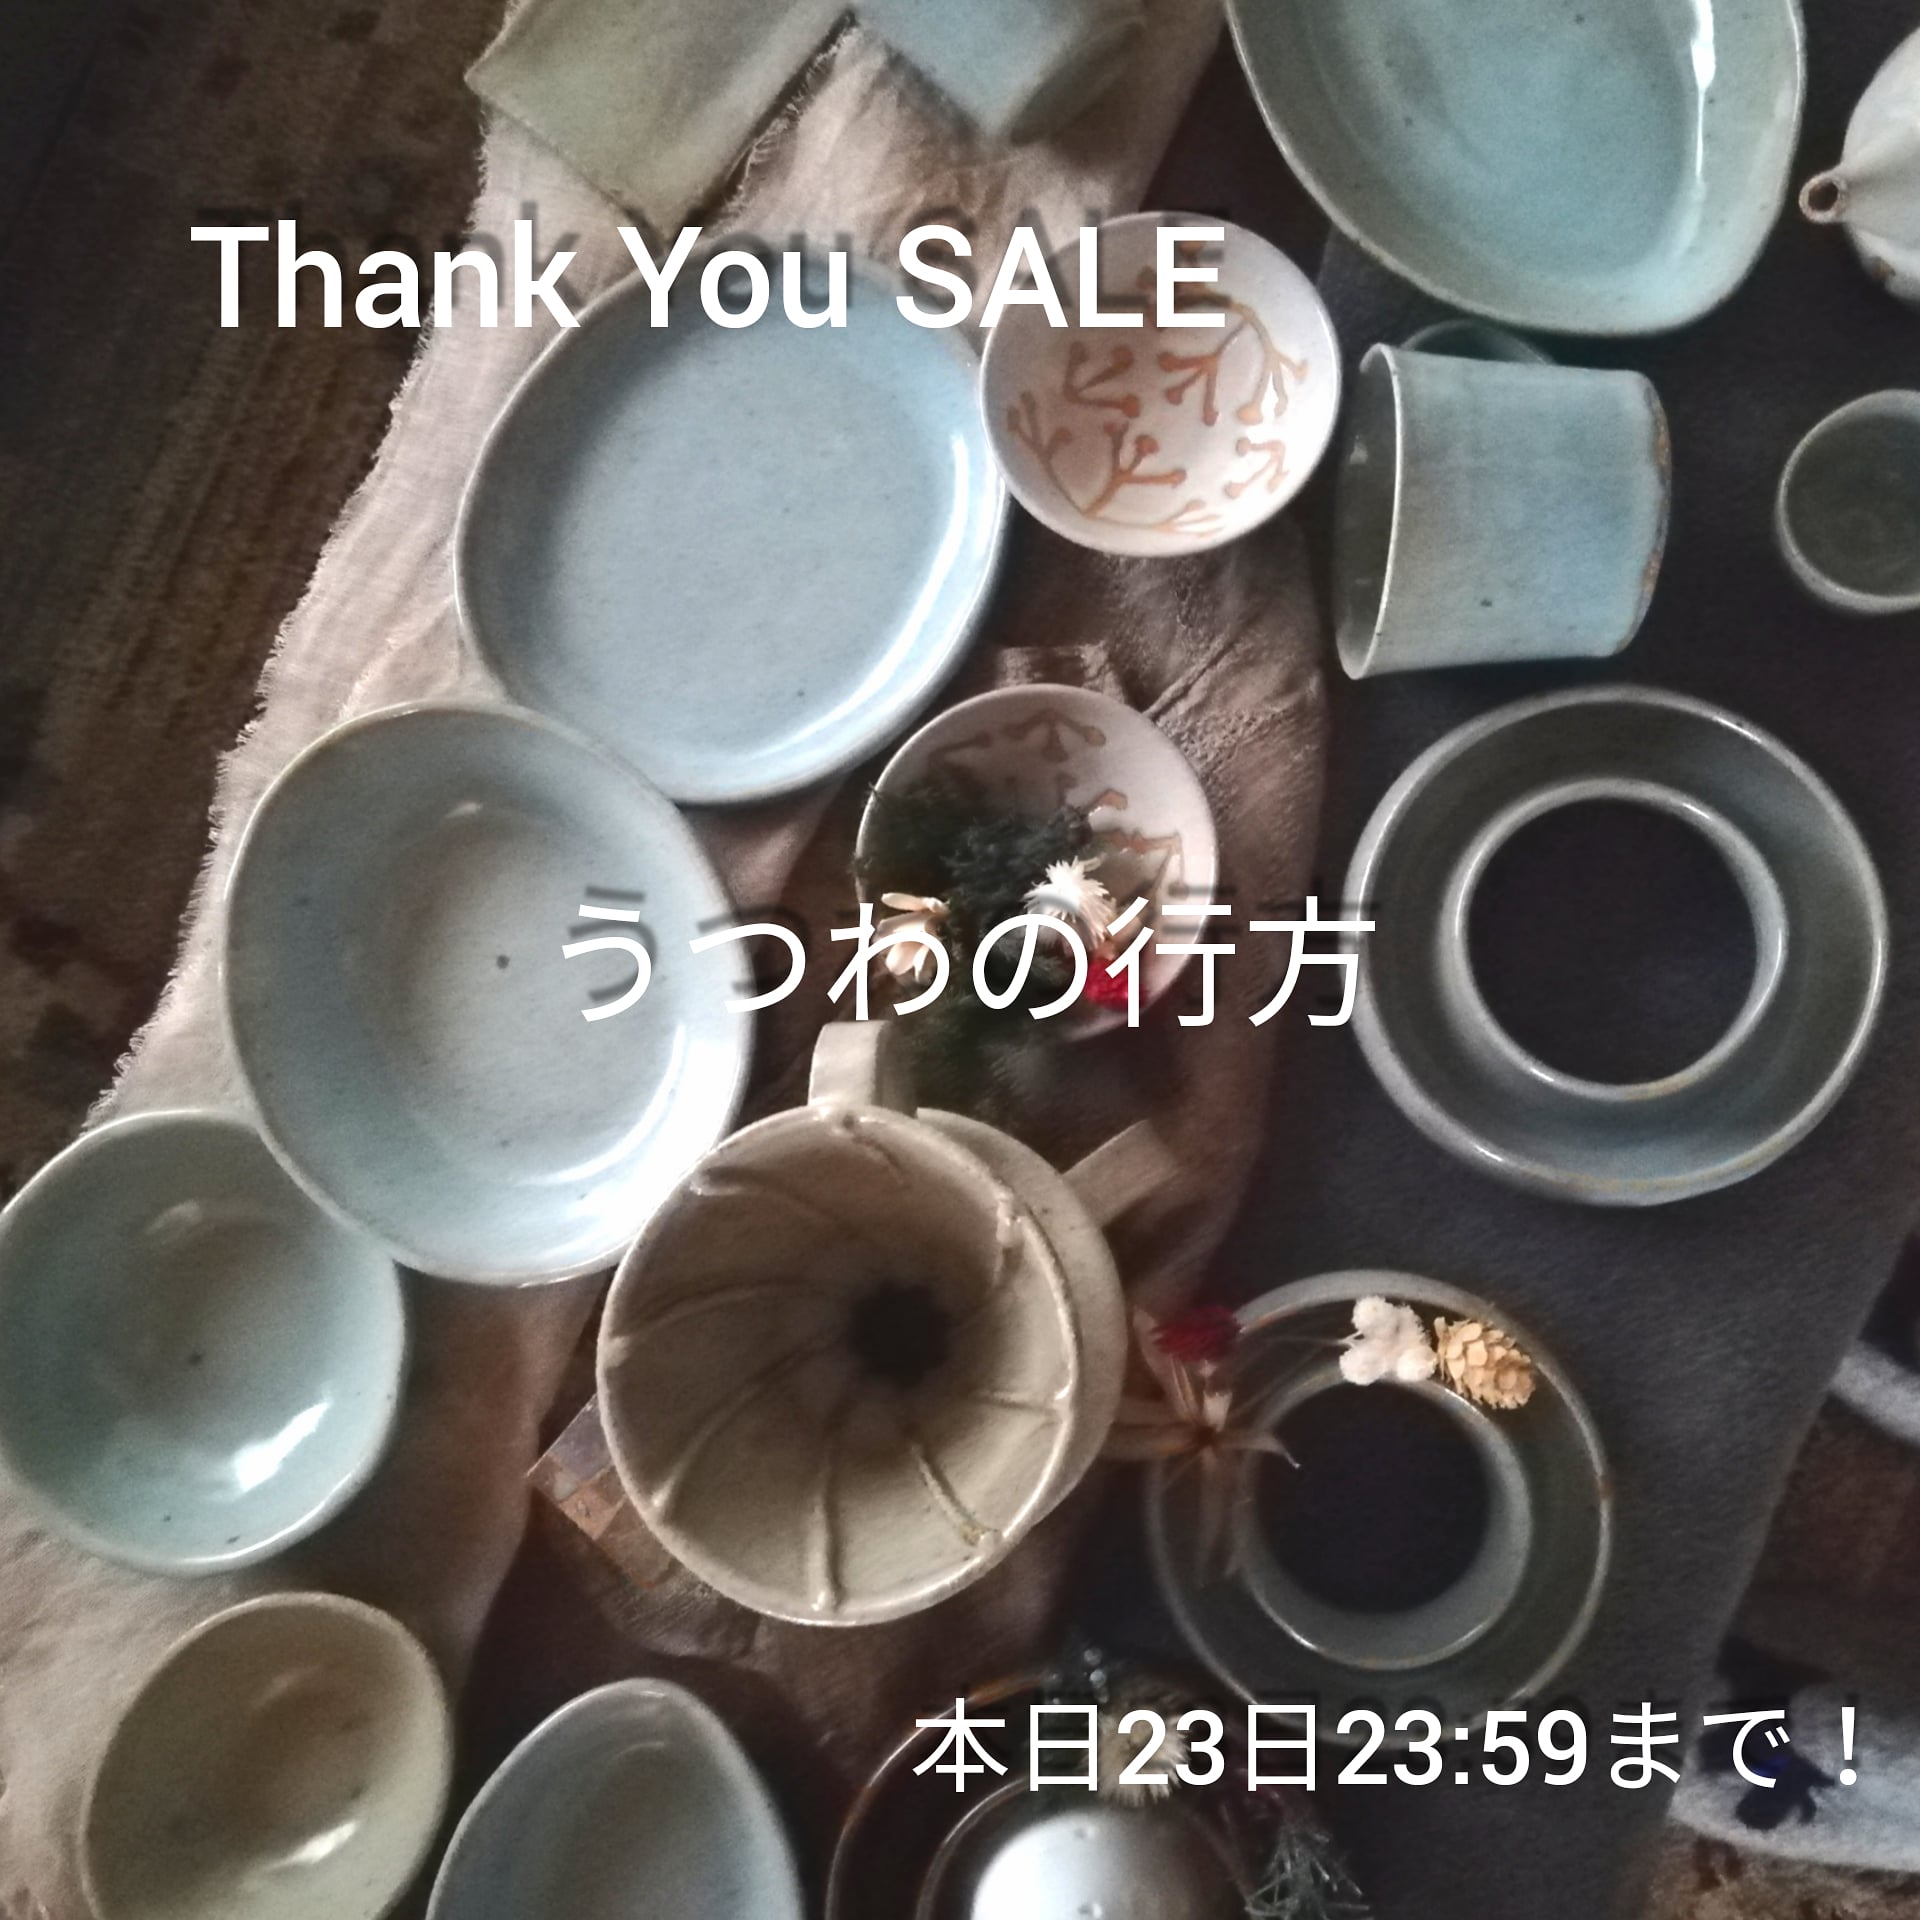 10％OFFsale